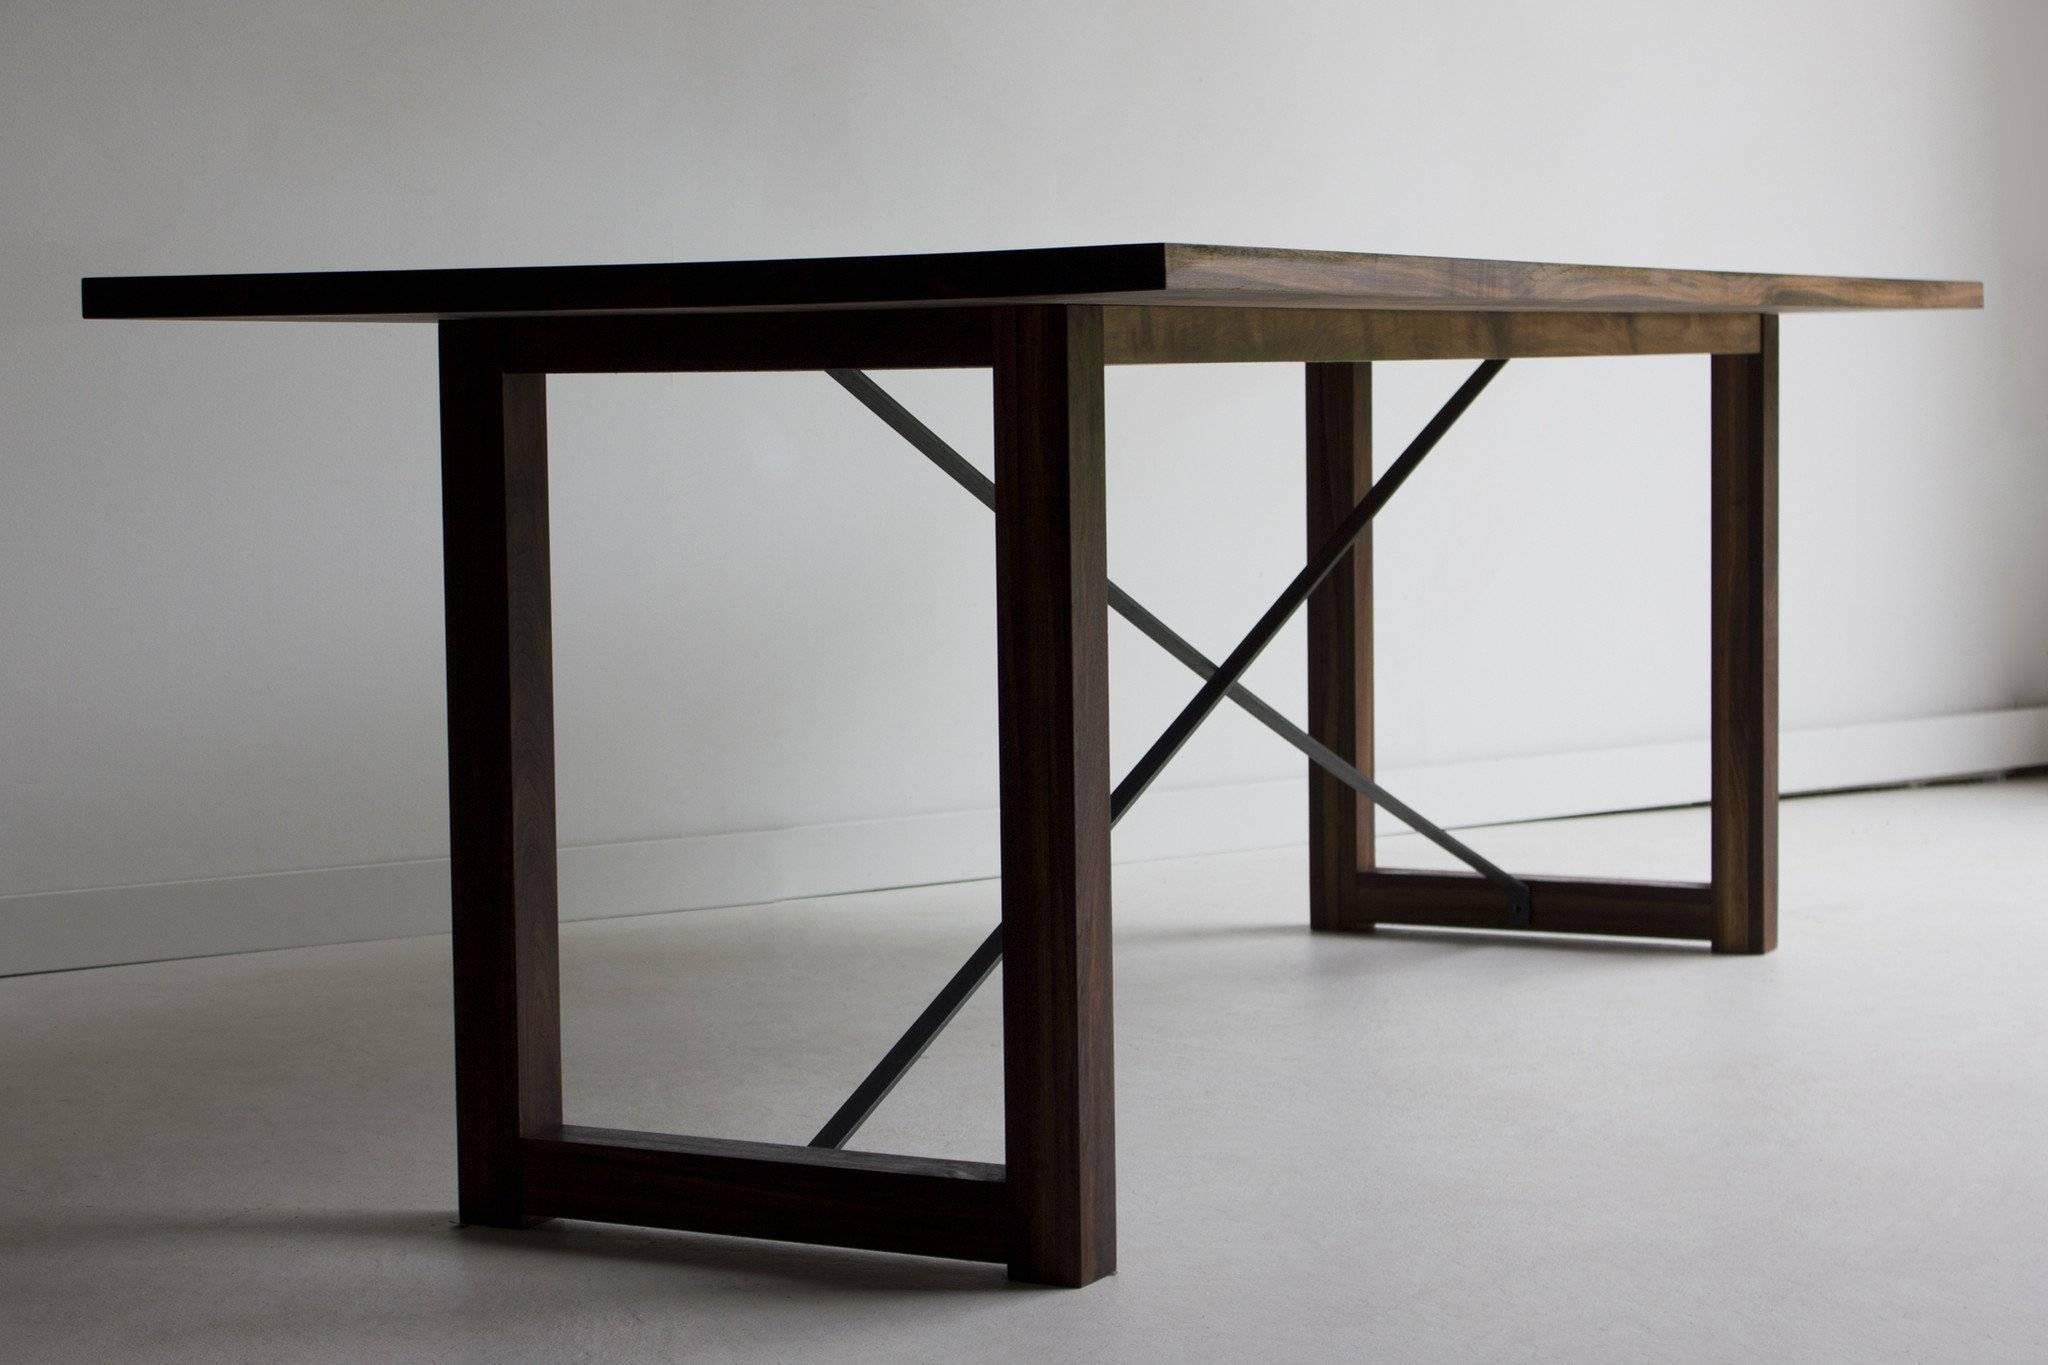 Modern wood dining table - 0116

This modern wood dining table is made in the heart of Ohio with locally sourced wood. We use the table both as a harvest dining table or desk. Each table is handmade with solid black walnut and finished with a